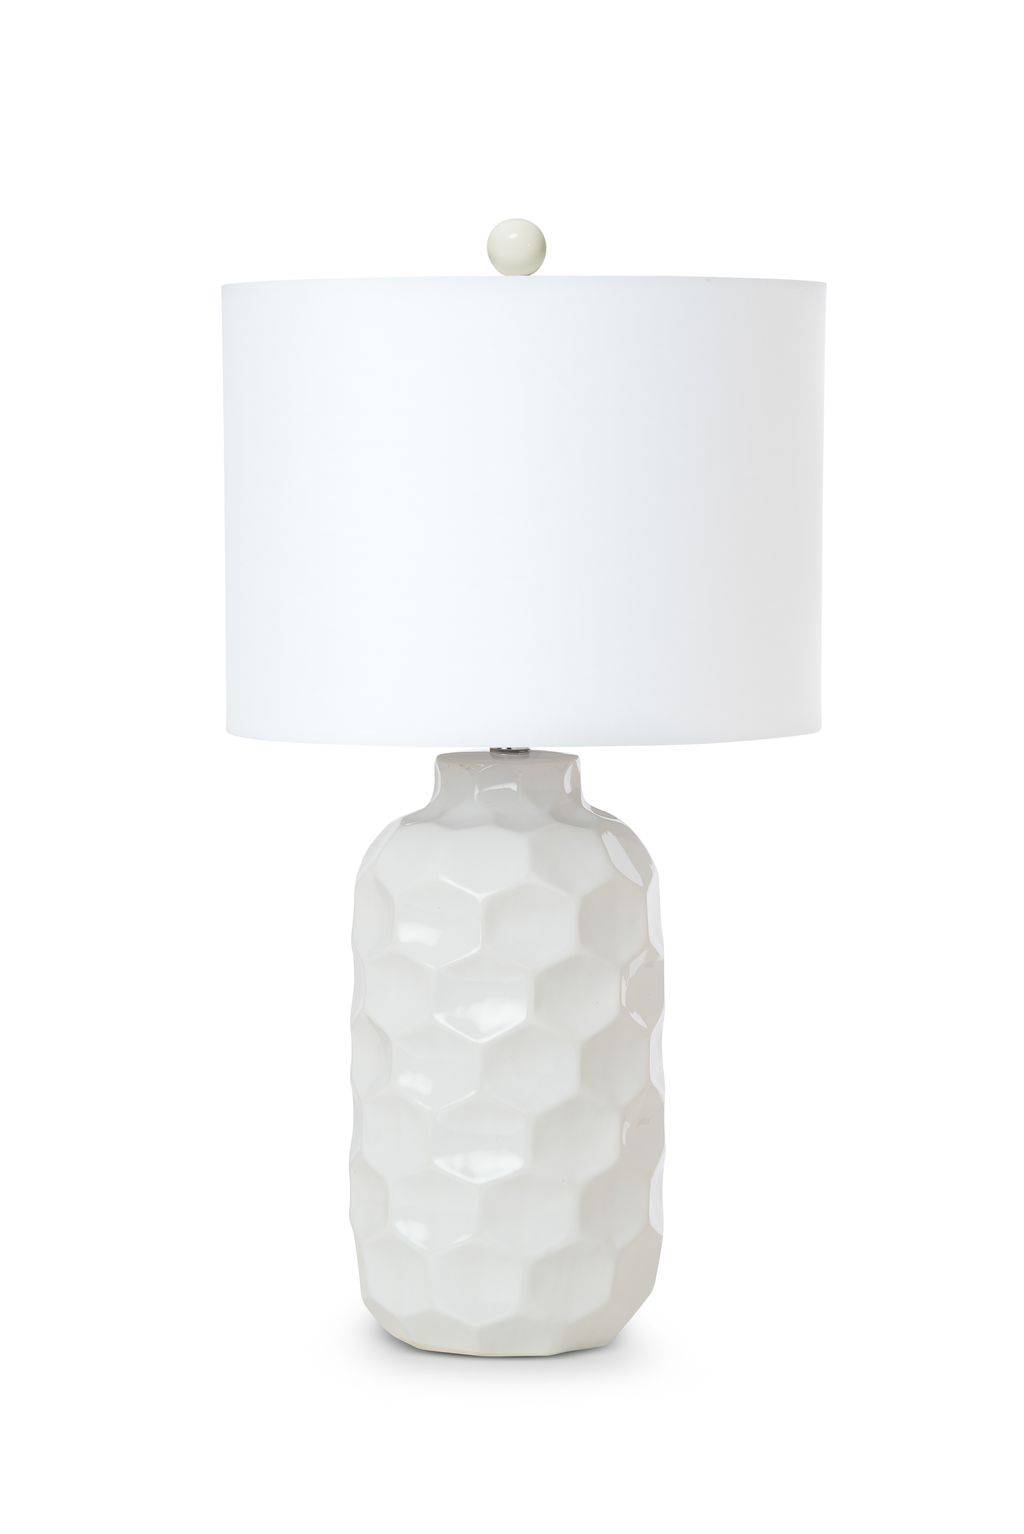 Luxe 114 Lamp